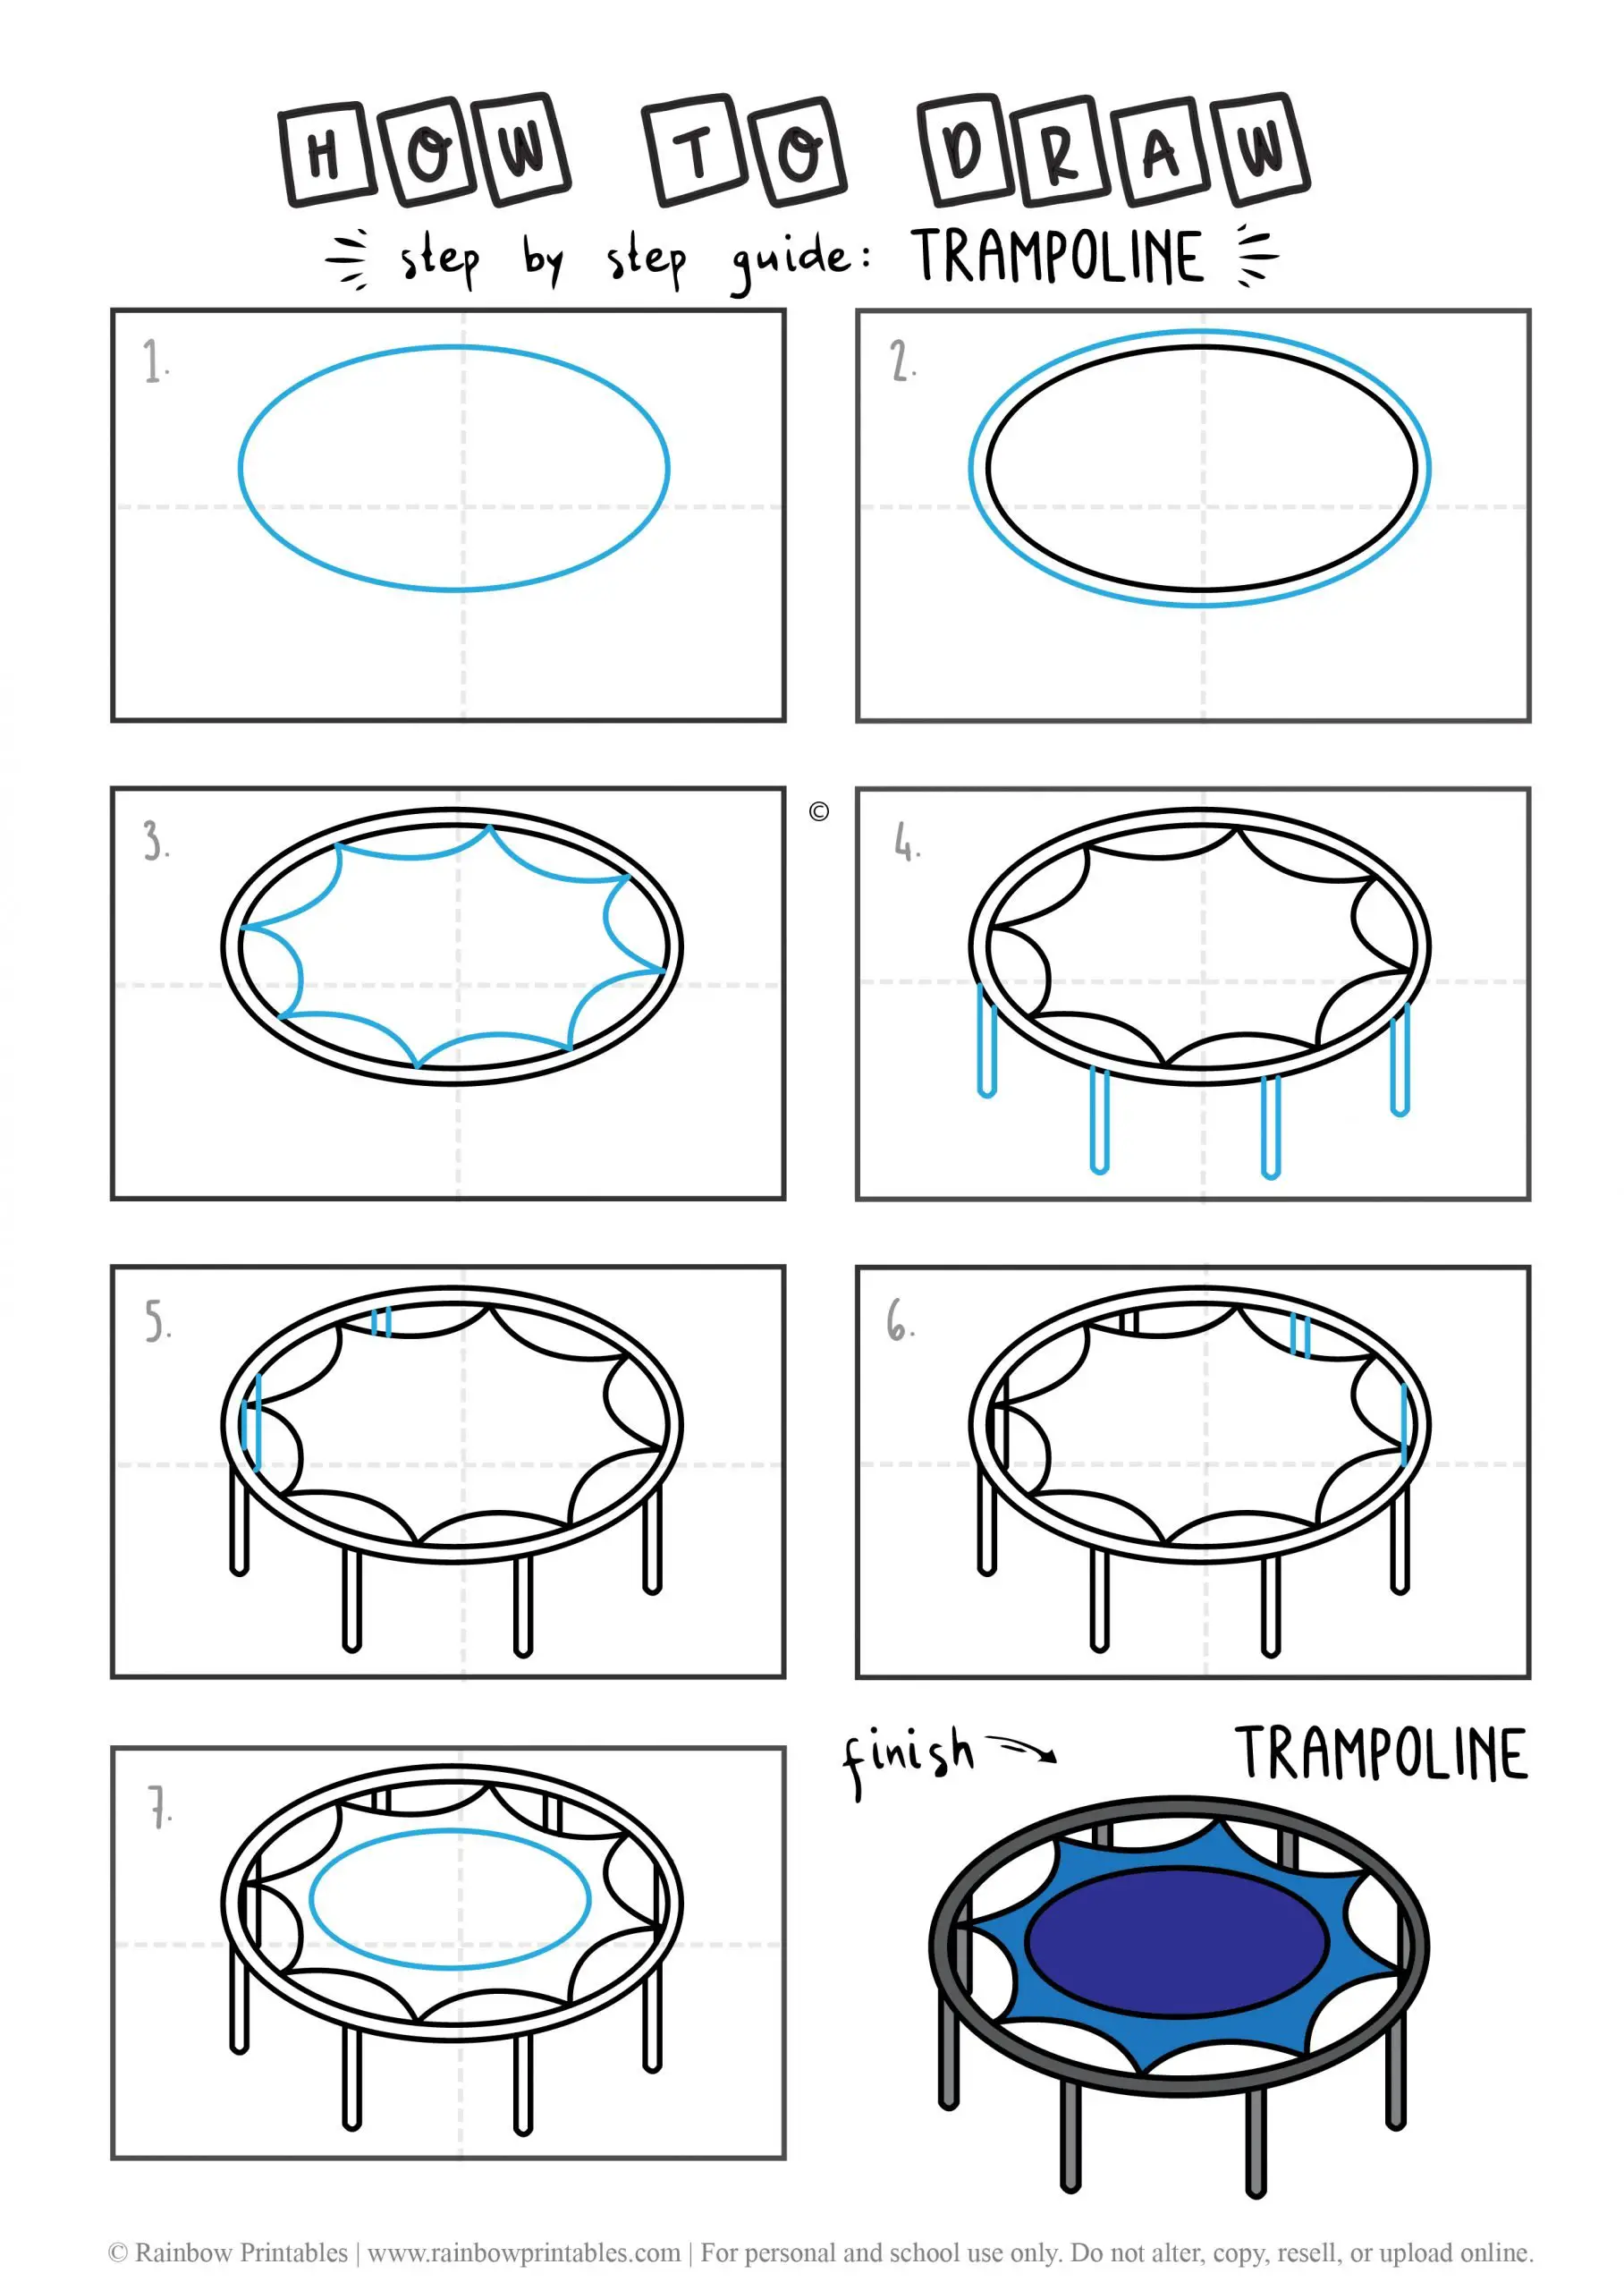 HOW TO DRAW A TRAMPOLINE JUMPING TOY ALTHETIC FITNESS GUIDE ILLUSTRATION STEP BY STEP EASY SIMPLE FOR KIDS